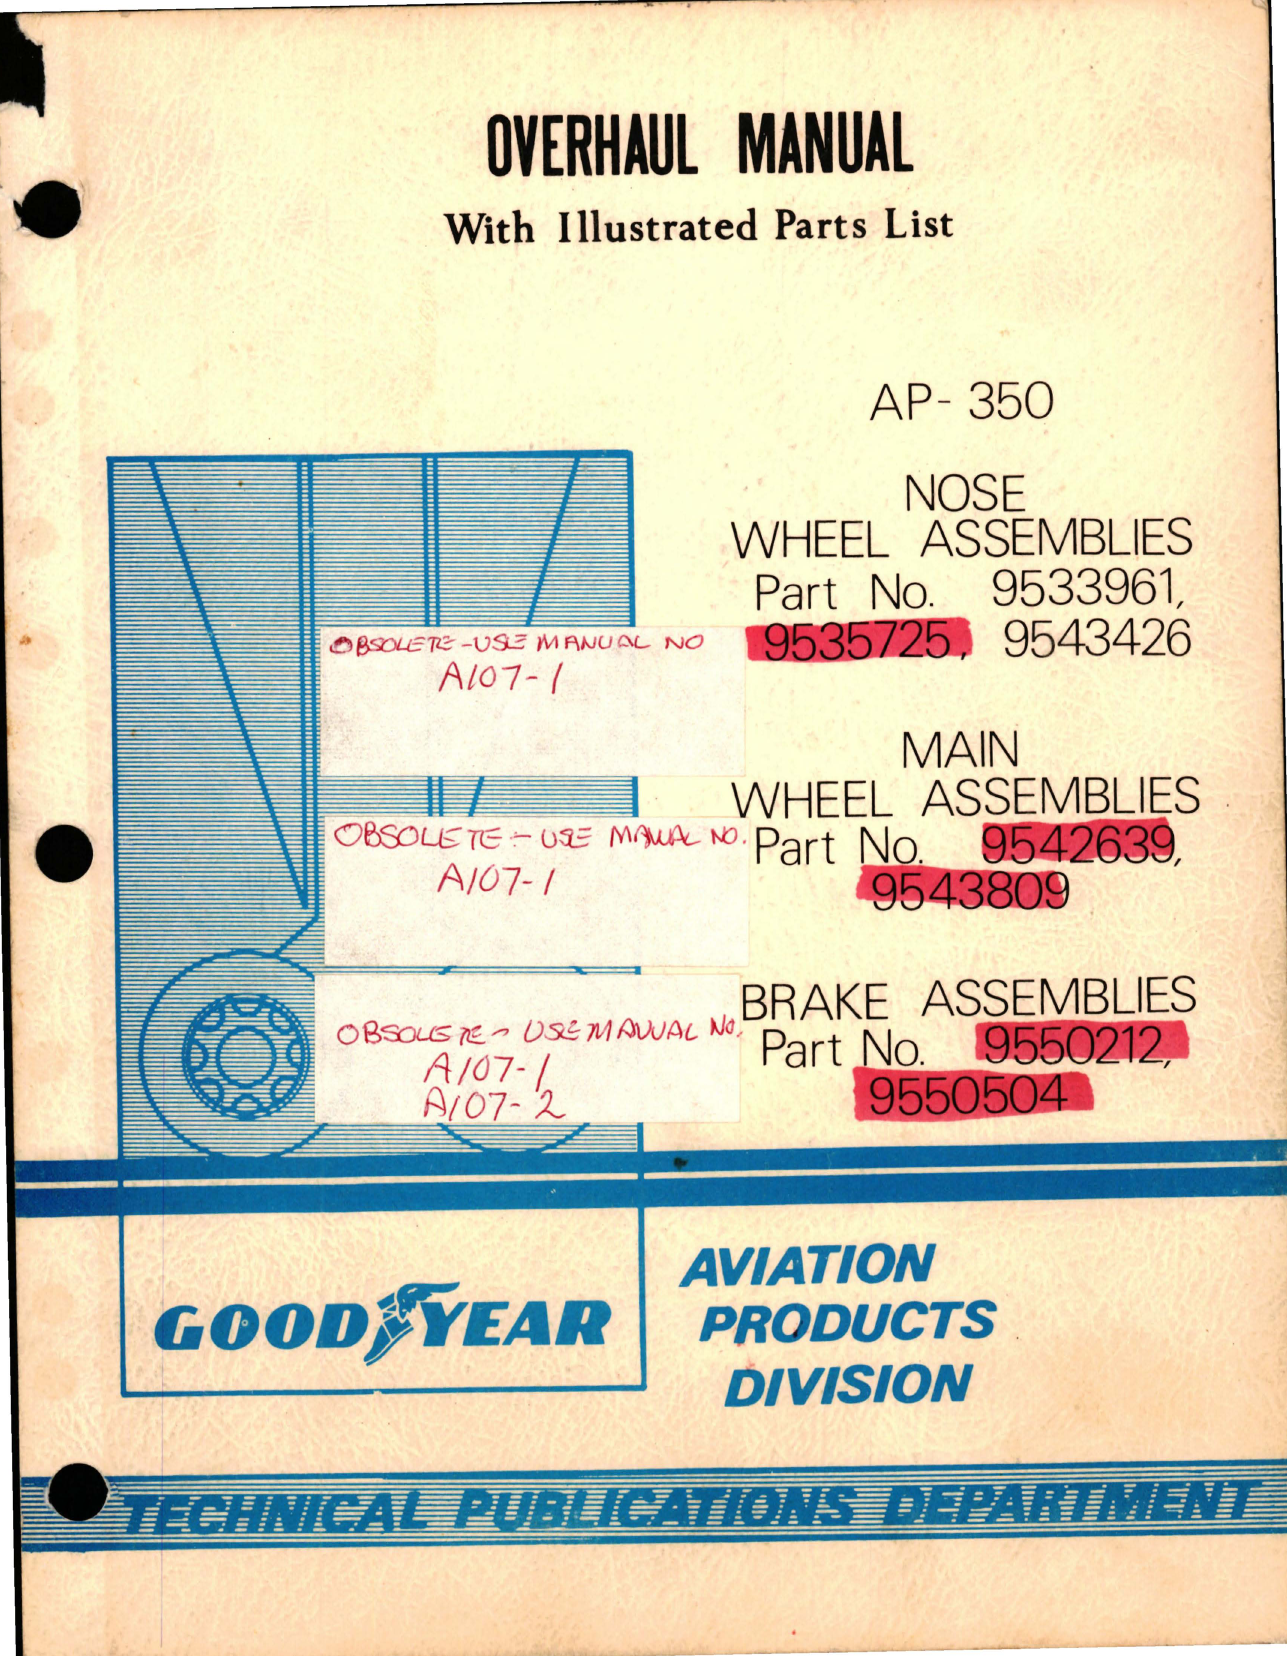 Sample page 1 from AirCorps Library document: Overhaul with Illustrated Parts List for Nose Wheel, Main Wheel, and Brake Assemblies